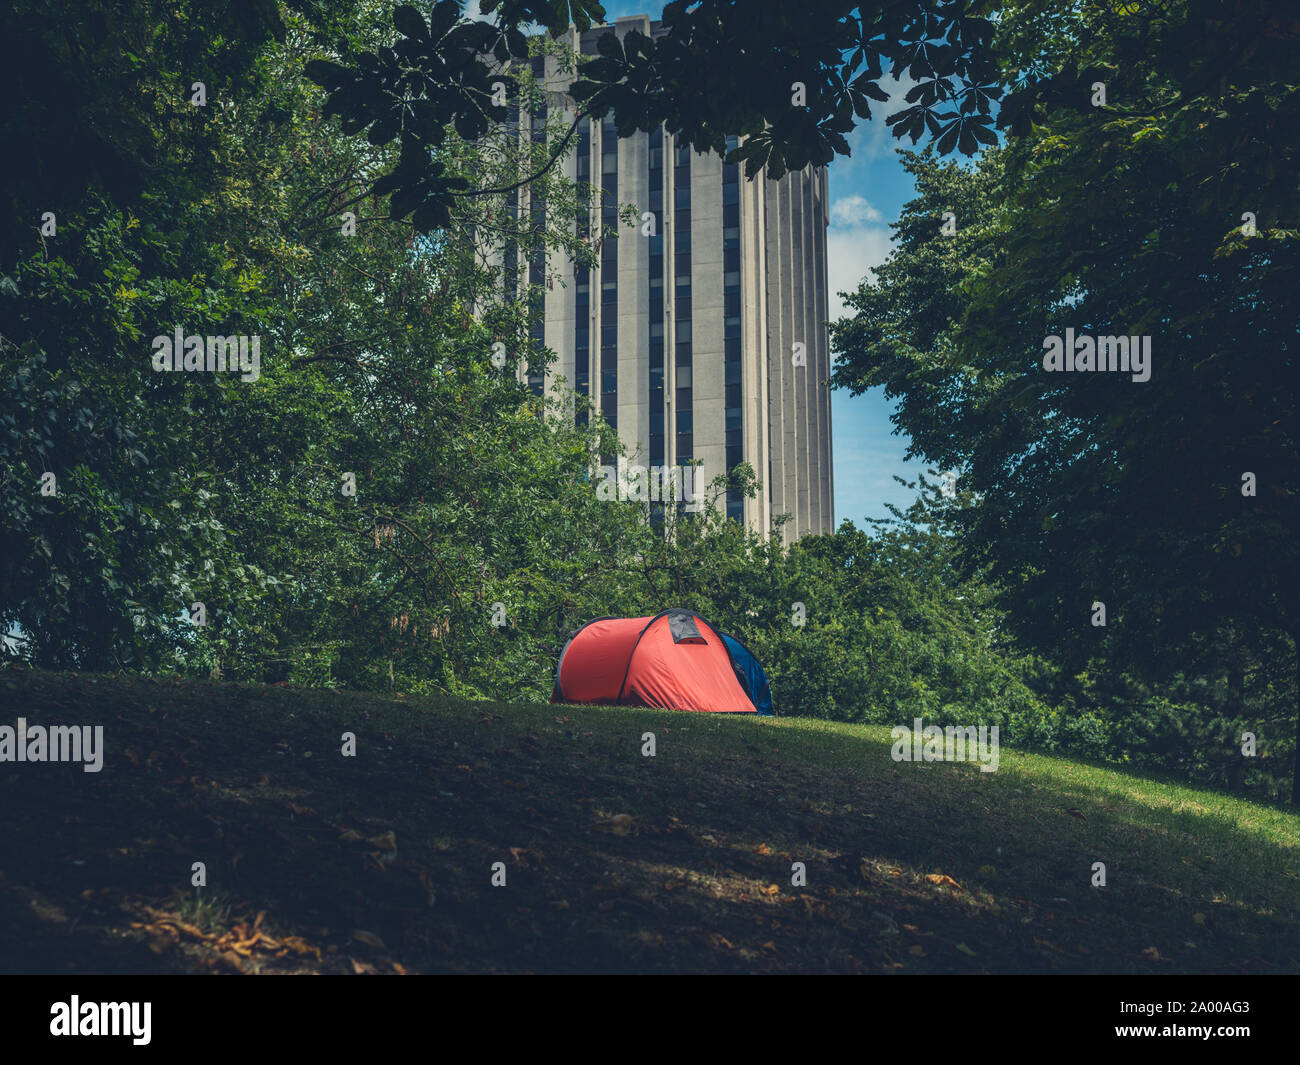 Two tents pitched in a city park with a skyscraper in the background Stock Photo